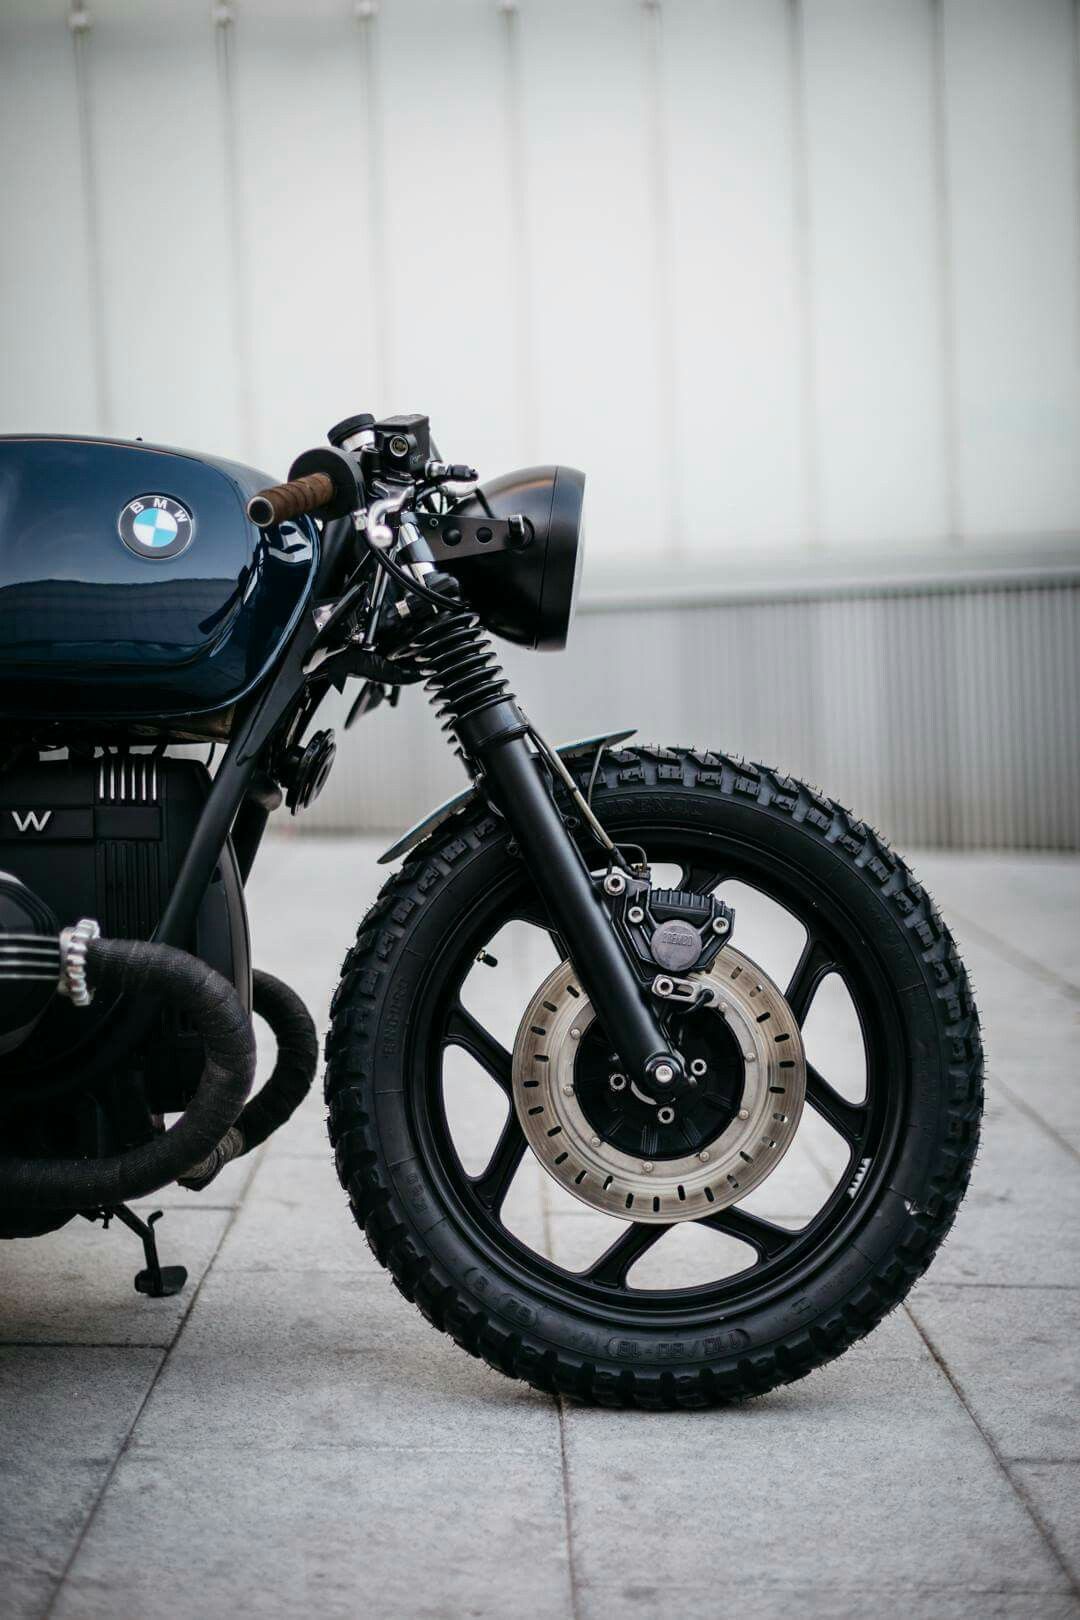 BMW Cafe Racer Wallpapers - Wallpaper Cave